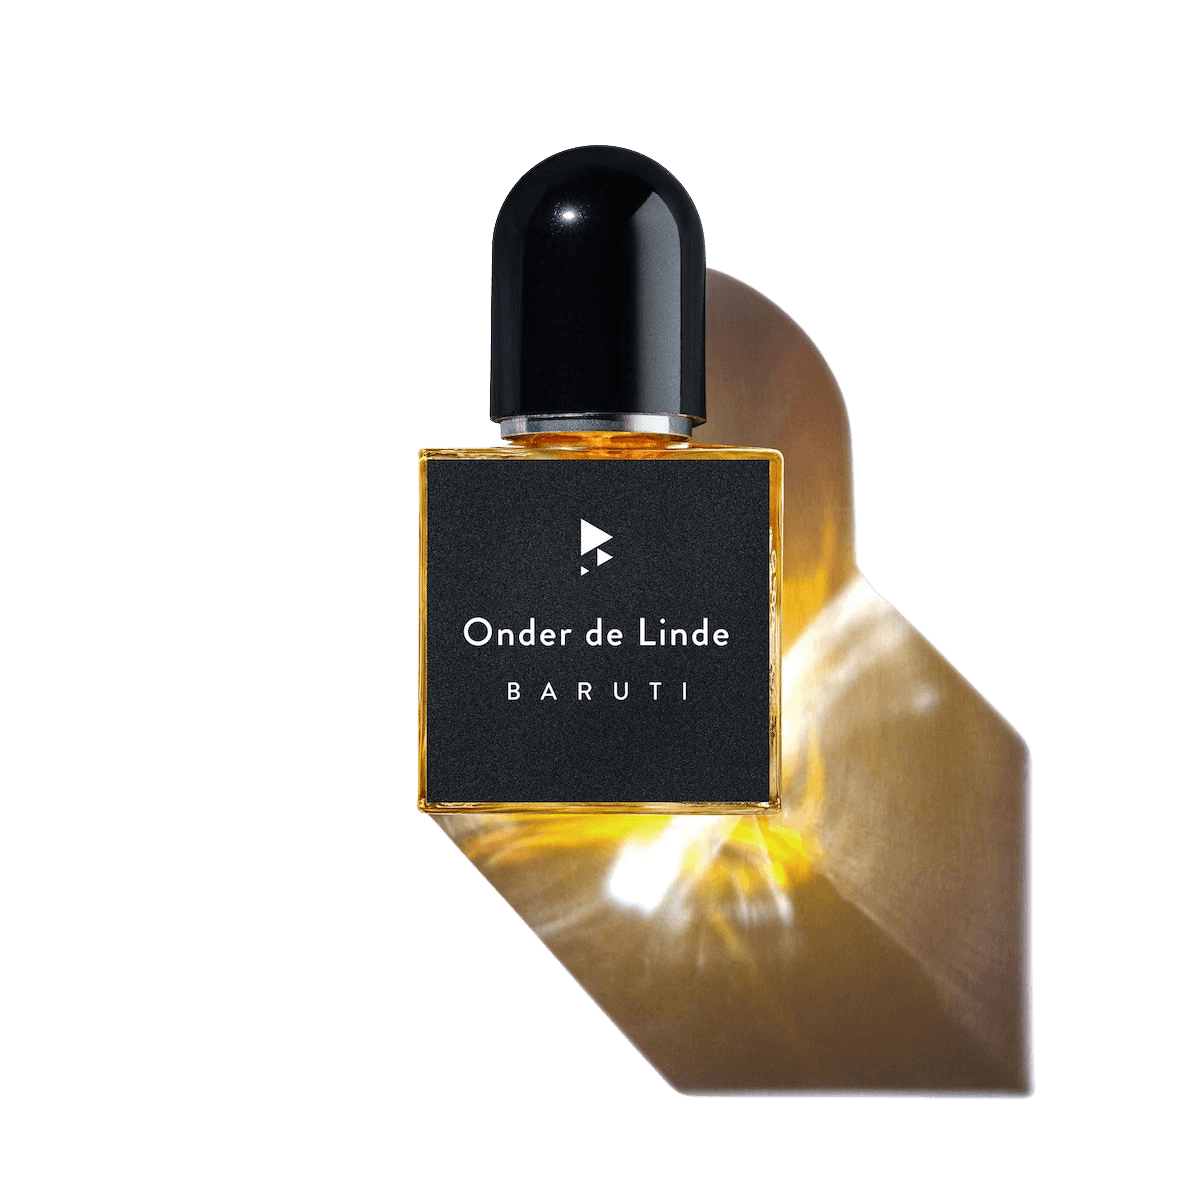 Image of the perfume Onder de Linde by the brand Baruti